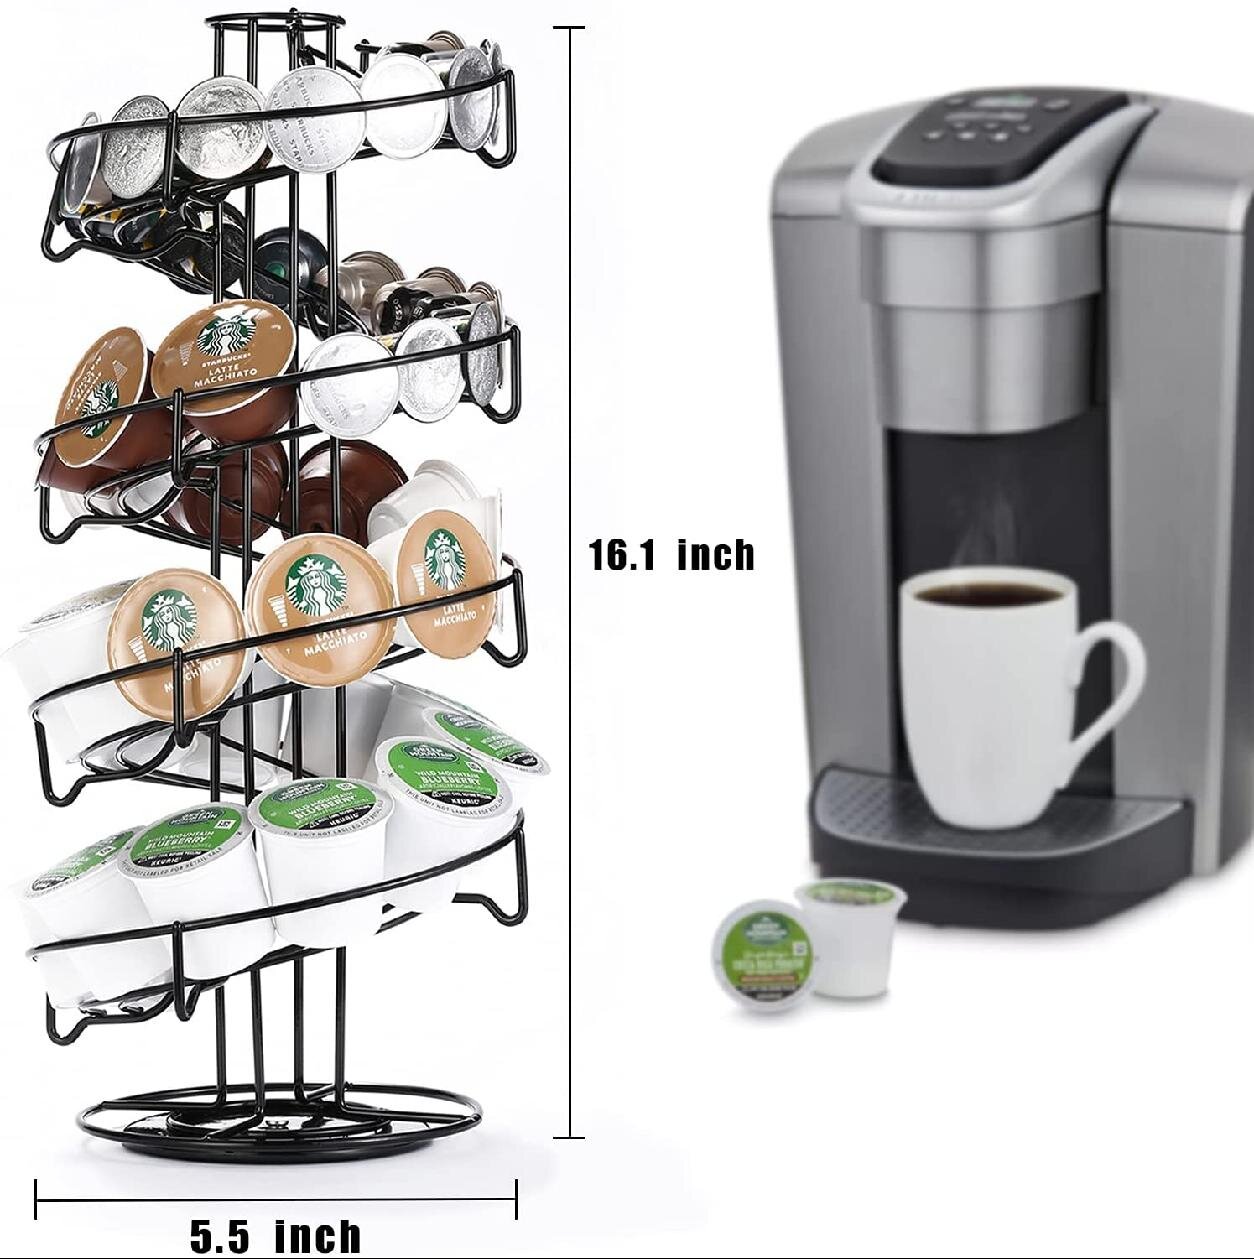 Holds 35 K-cups in Black Kitchen Design Coffee Cup Holder K-cup Carousel 